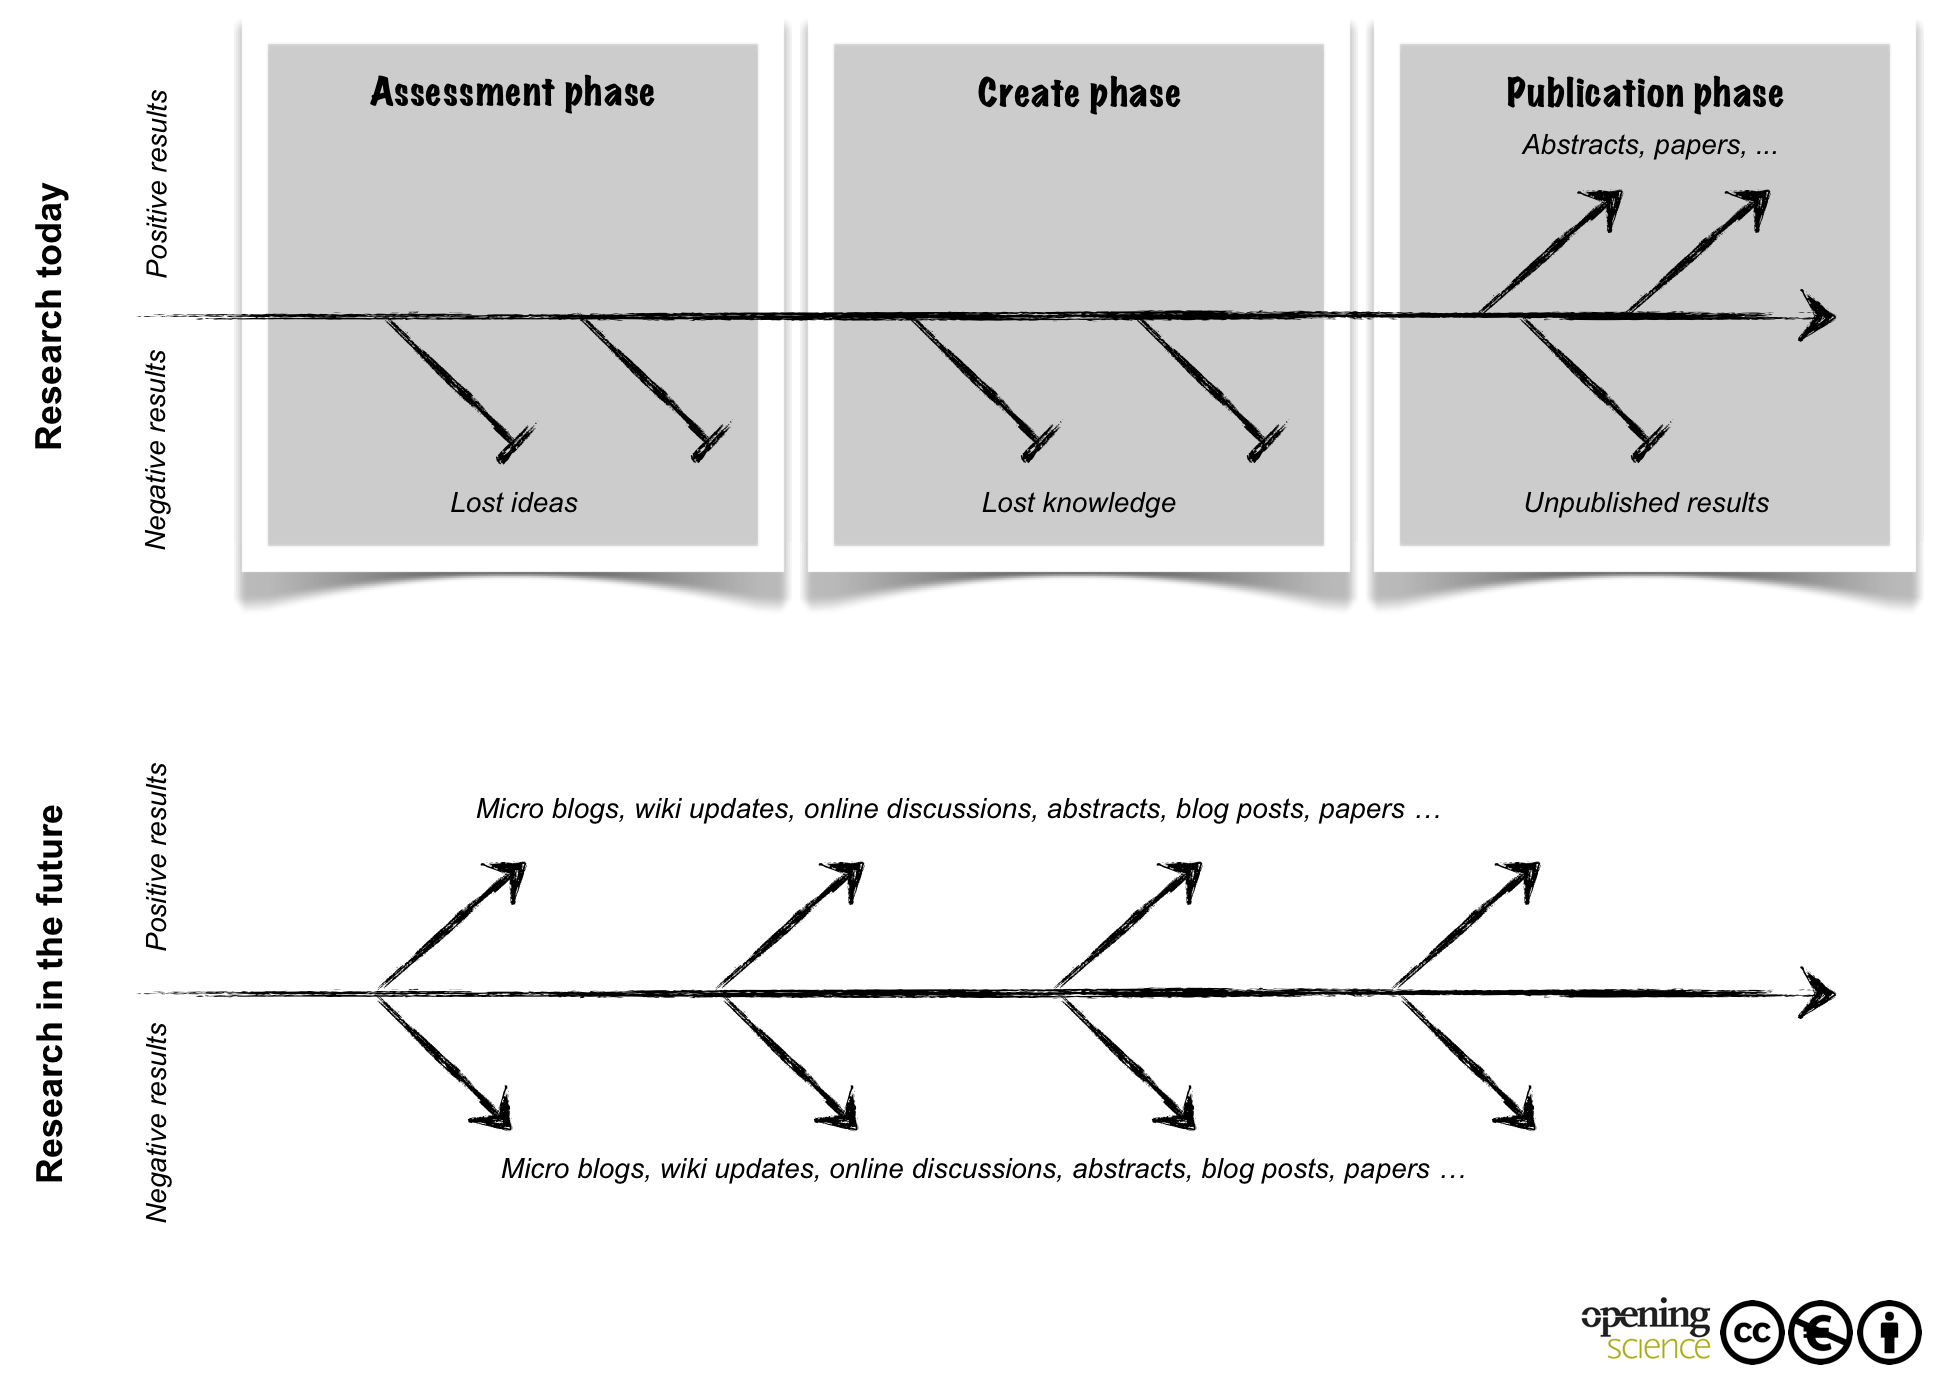 Figure 2. Today, research projects are conducted until results justify a full-blown paper. In the future, scientists might openly share ideas, preliminary results, and negative results at much earlier stages of their research using the novel publication methods that became available with the Internet.